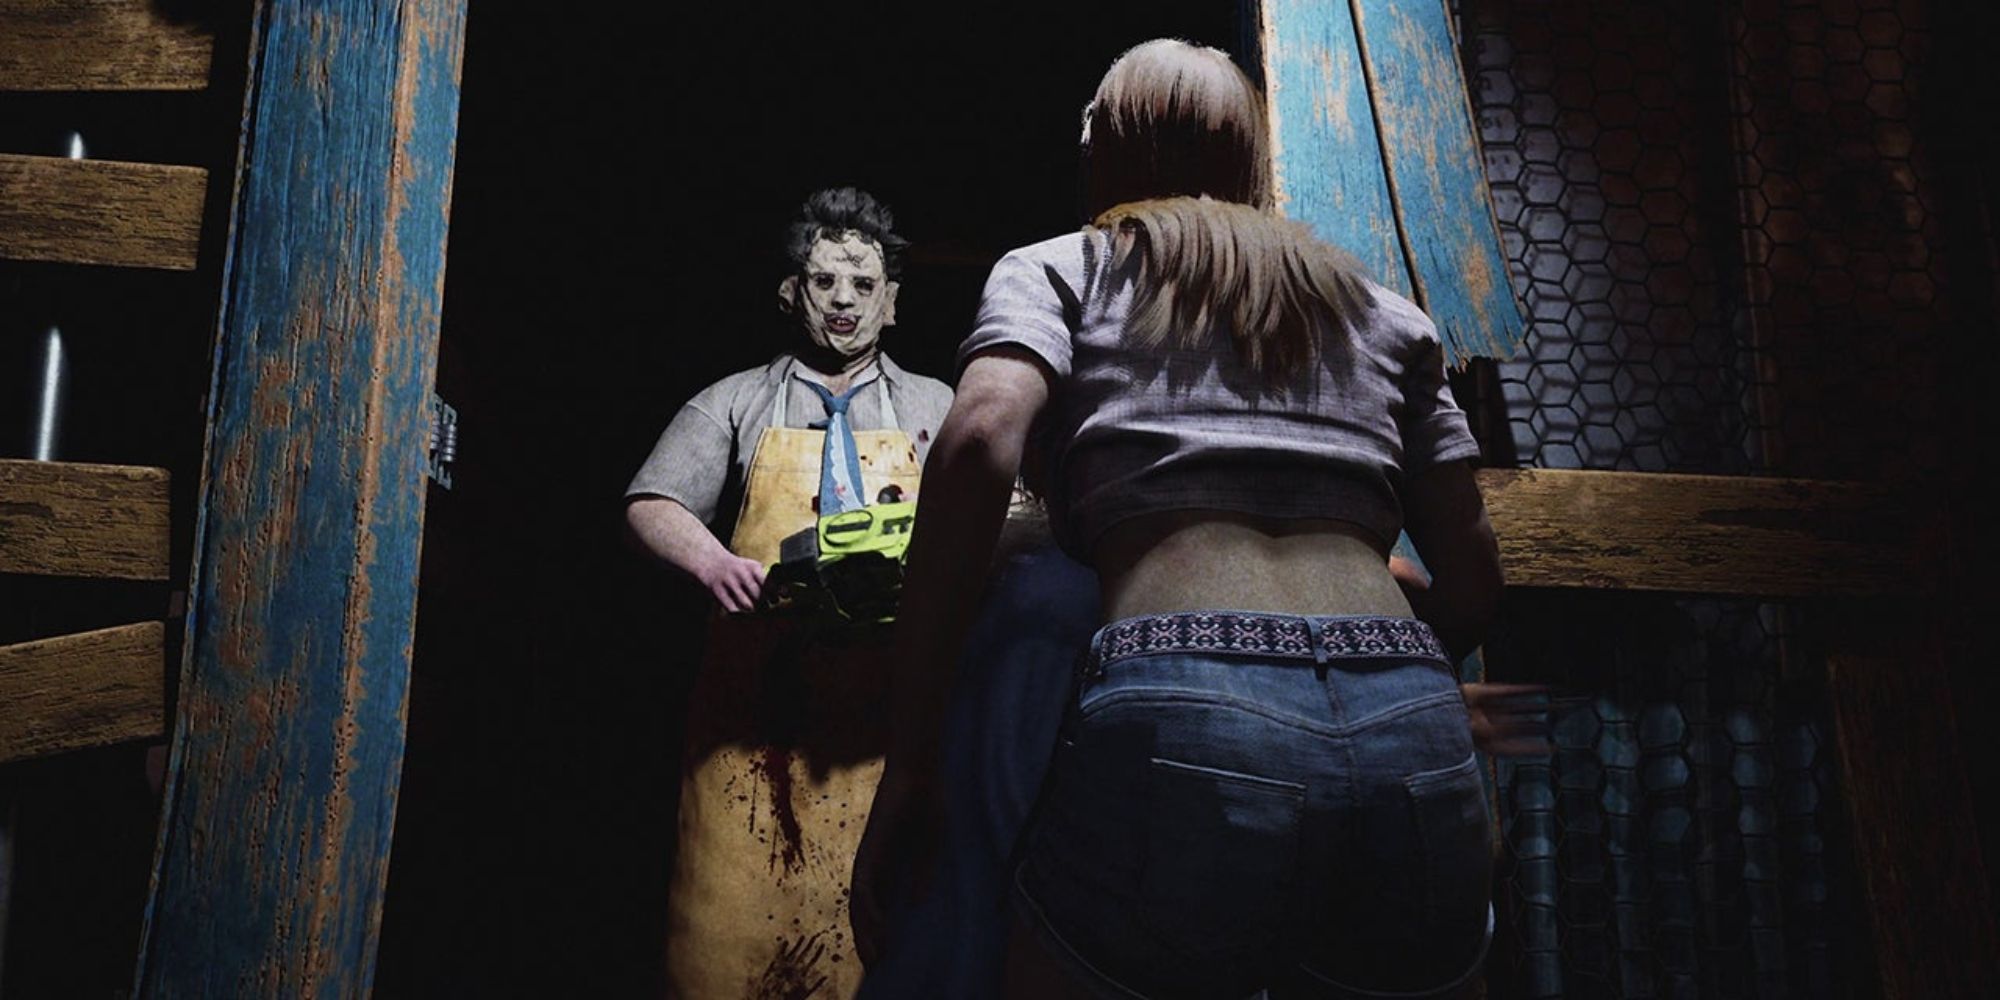 Leatherface and girl in The Texas Chain Saw Massacre